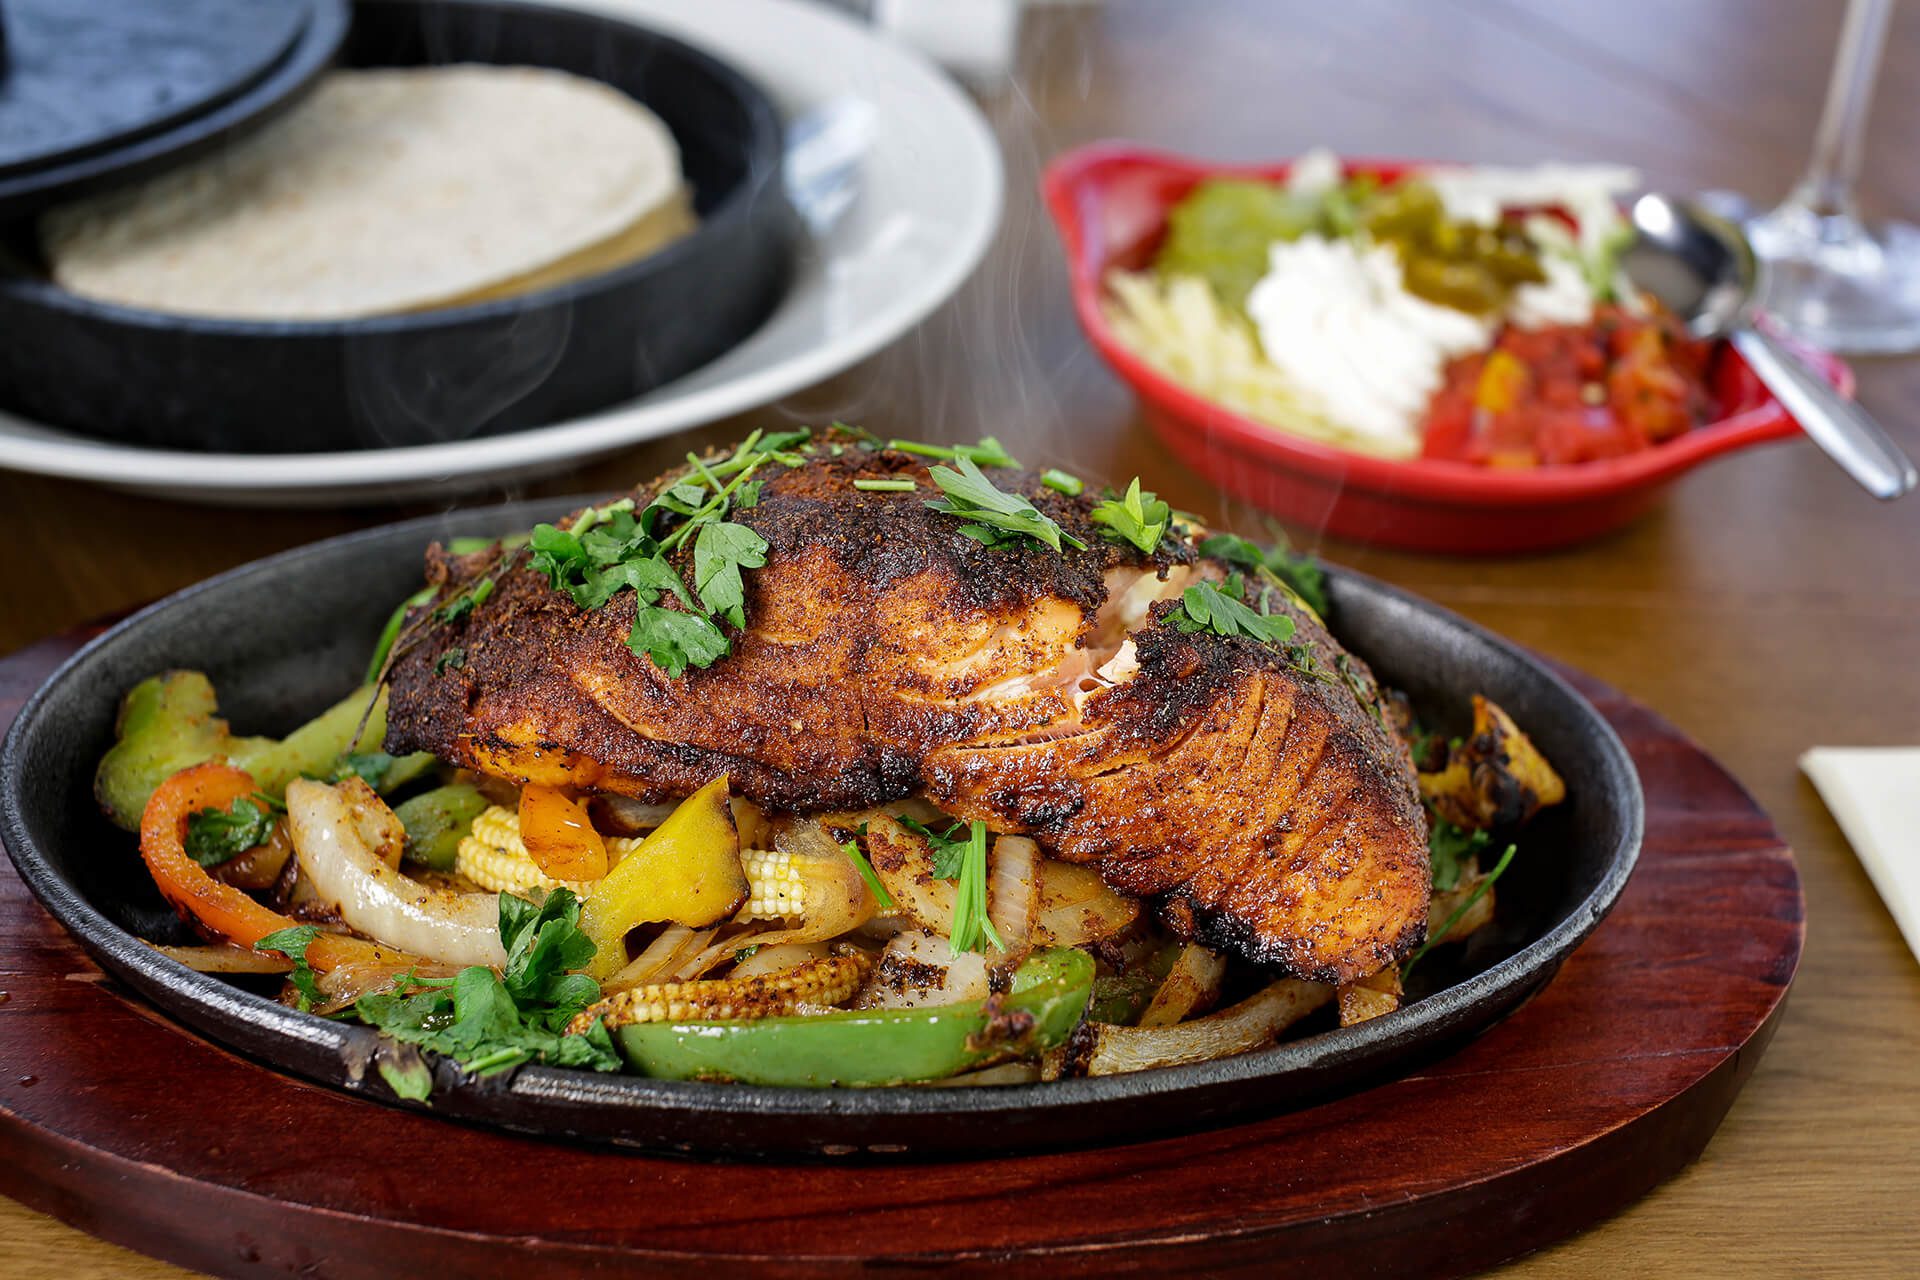 Food photography of a sizzling salmon dish presented on a bed of mixed roasted vegetables